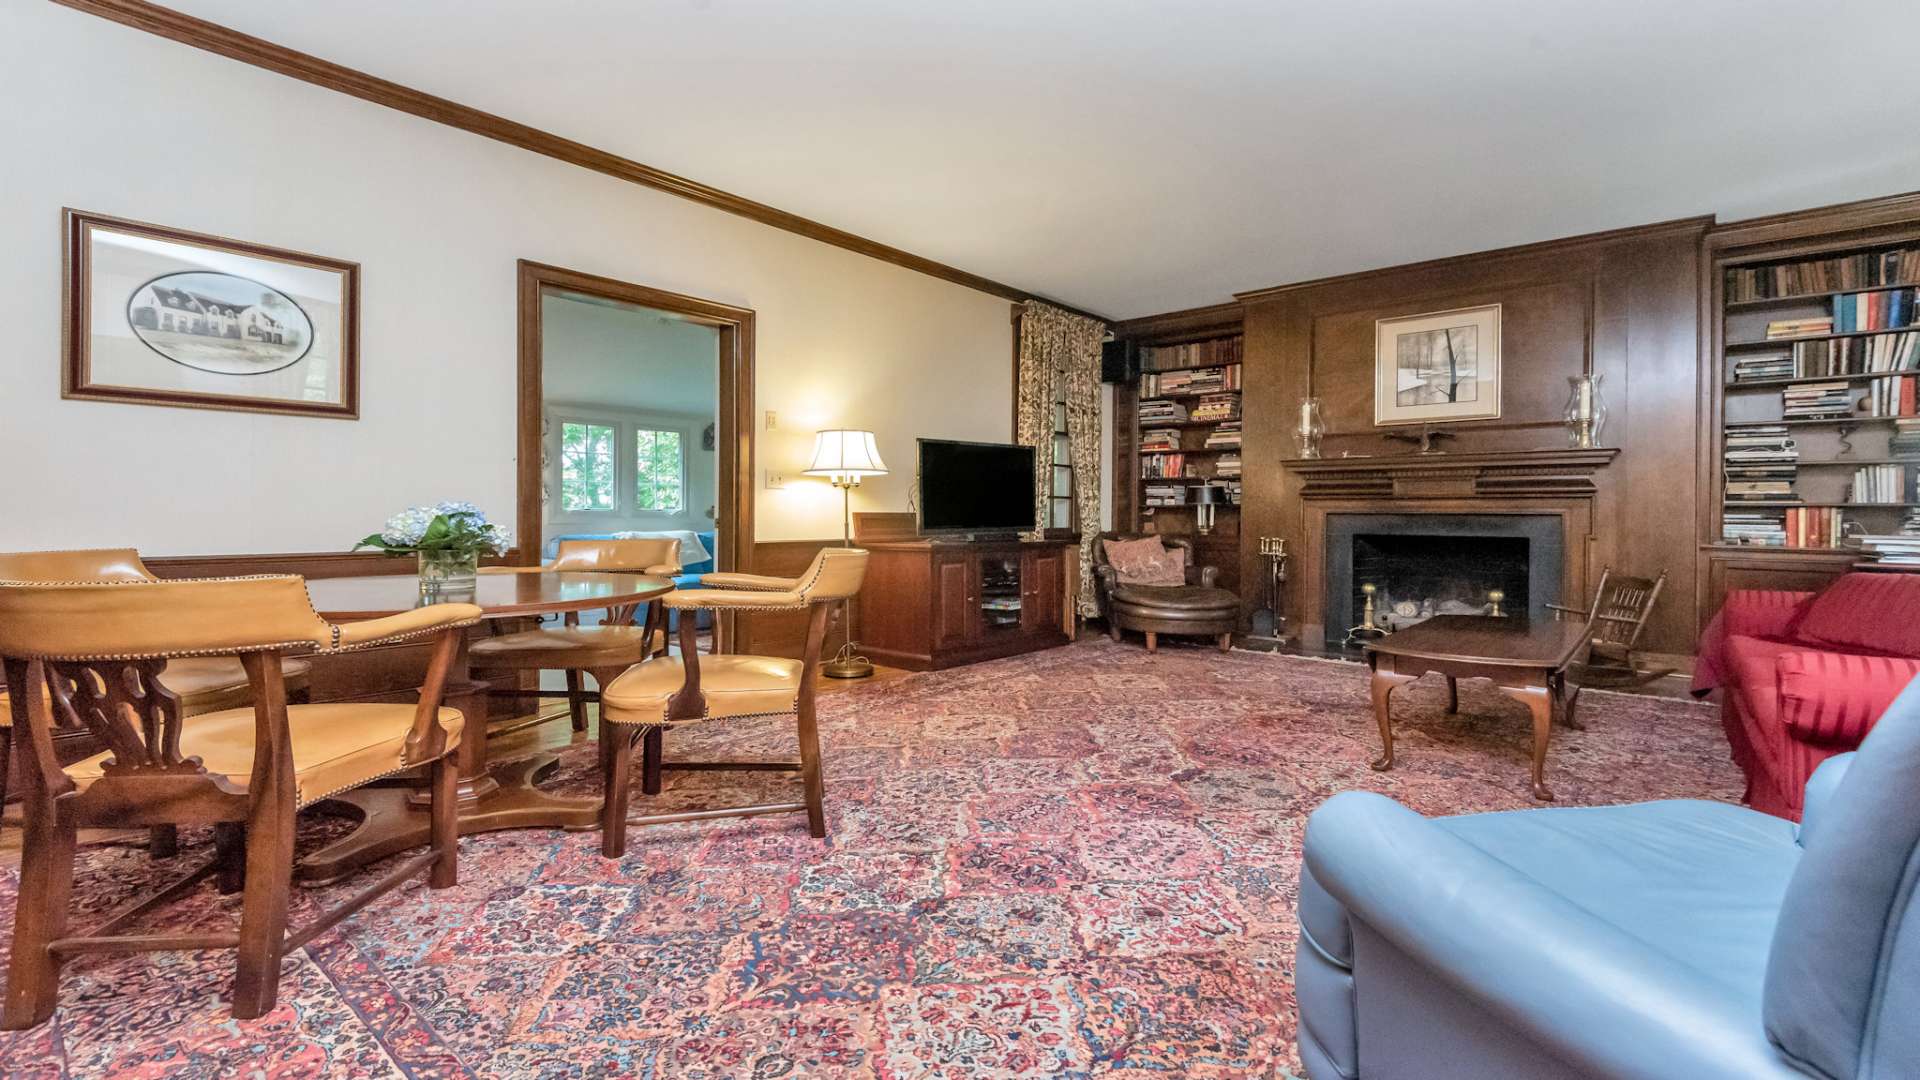 This is the den, or study, where you will find the second fireplace, custom woodworks, and the ideal place to unwind or engage in lively conversations while entertaining family and friends.